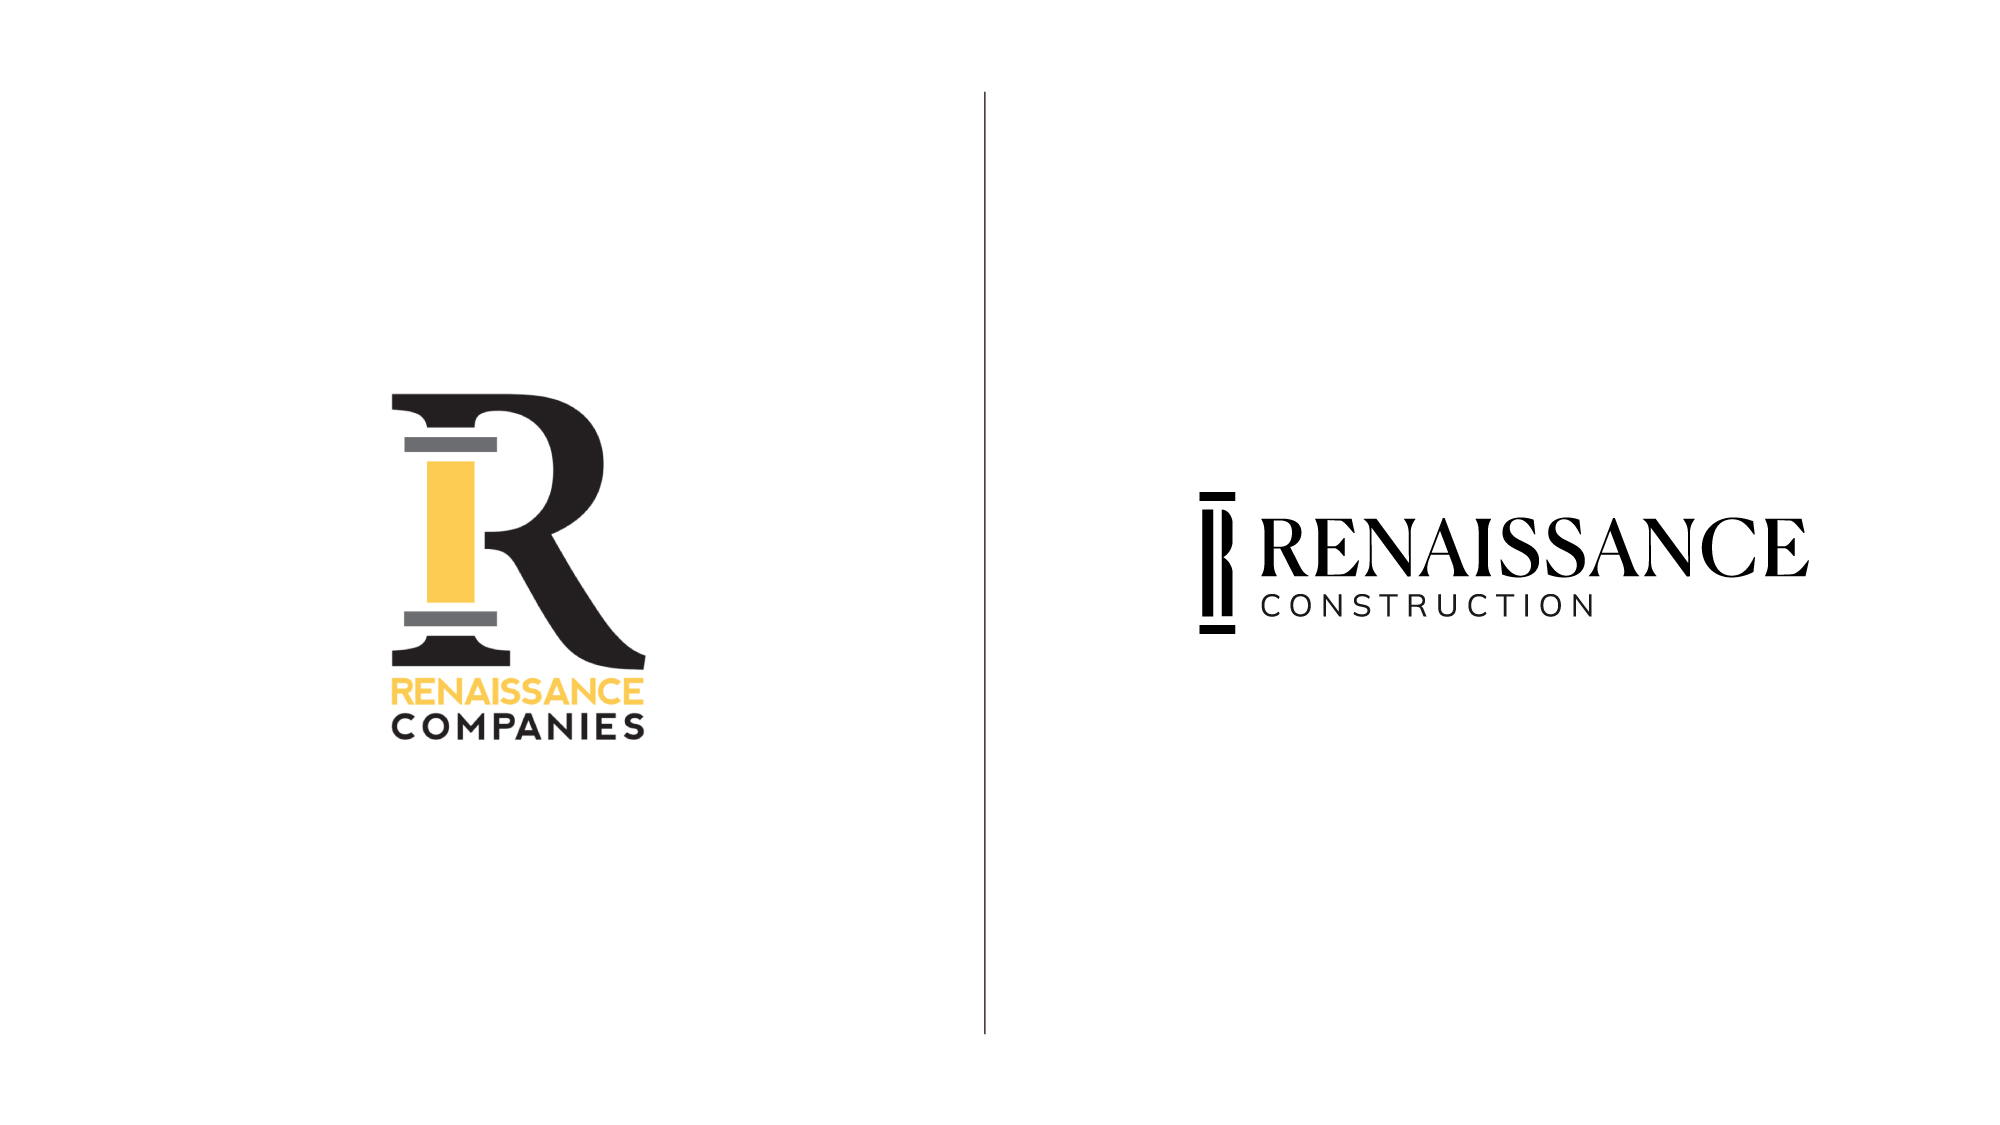 featured image two:The Art of Construction - Renaissance Rebrand